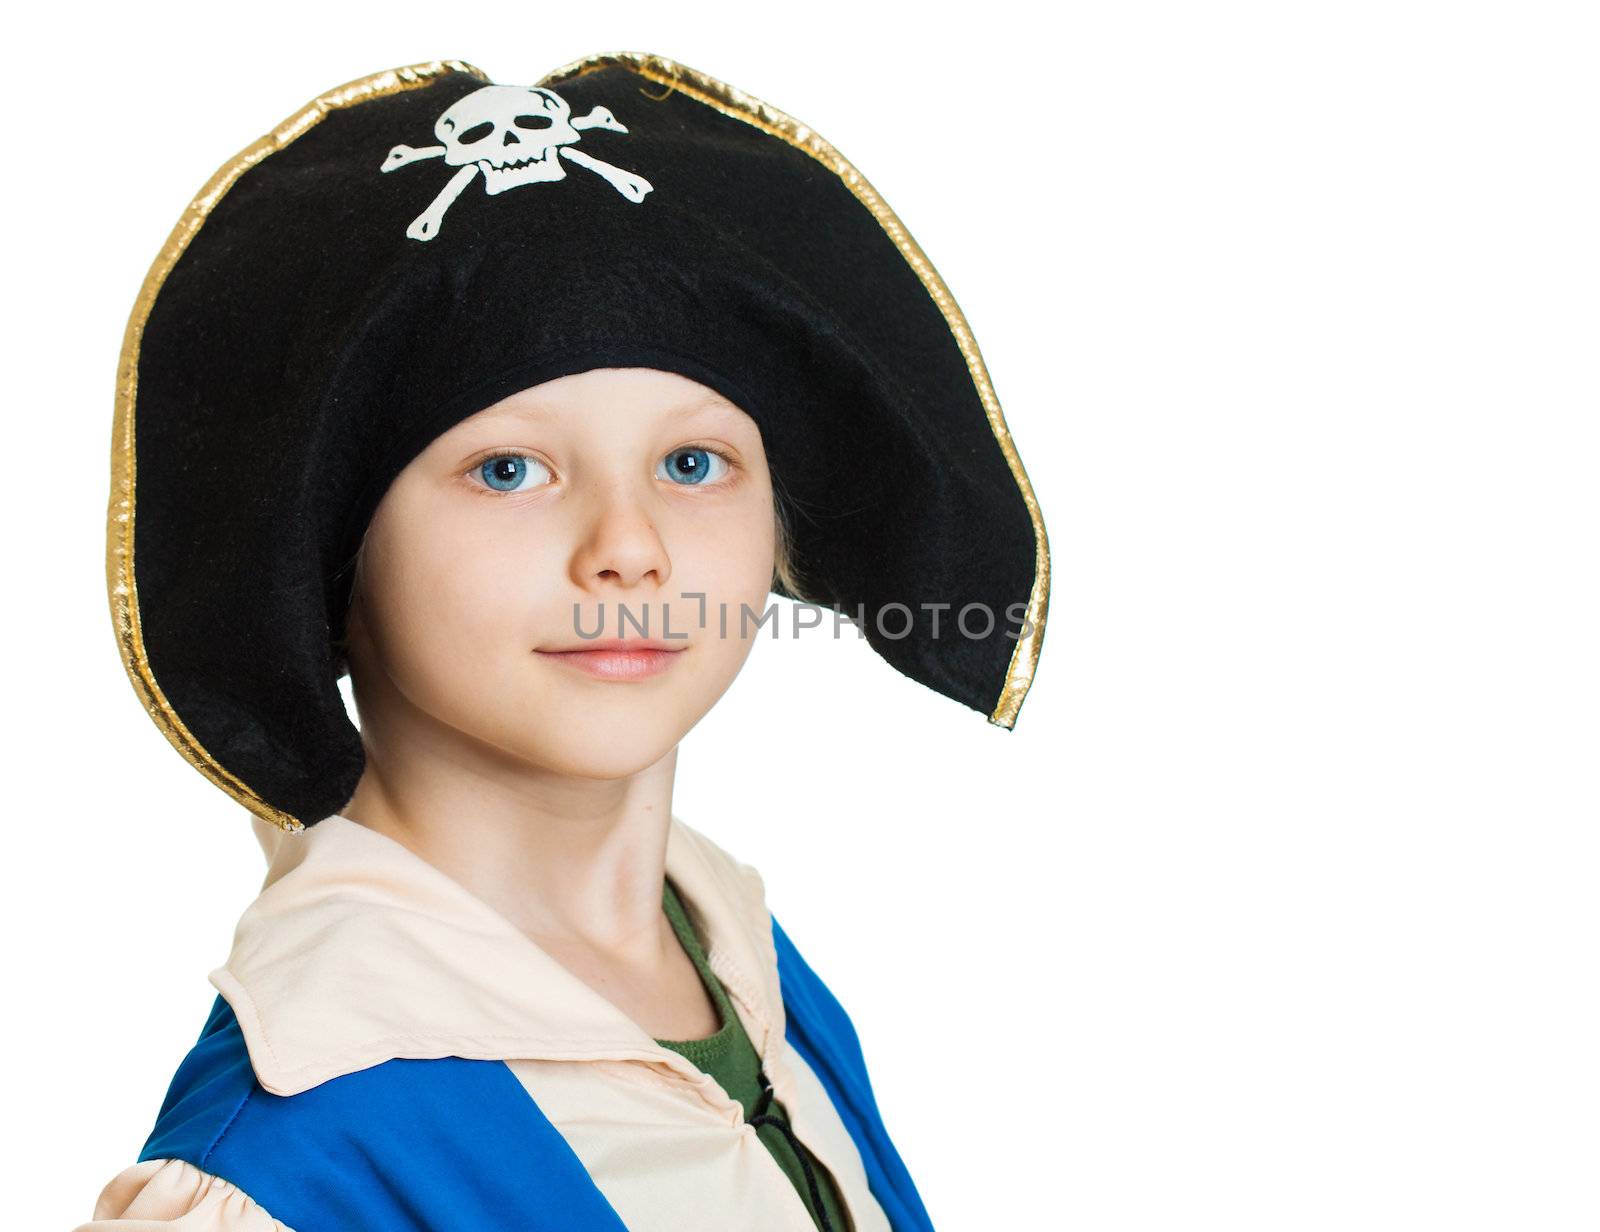 Close-up portrait of a boy dressed as a pirate. Isolated on white.